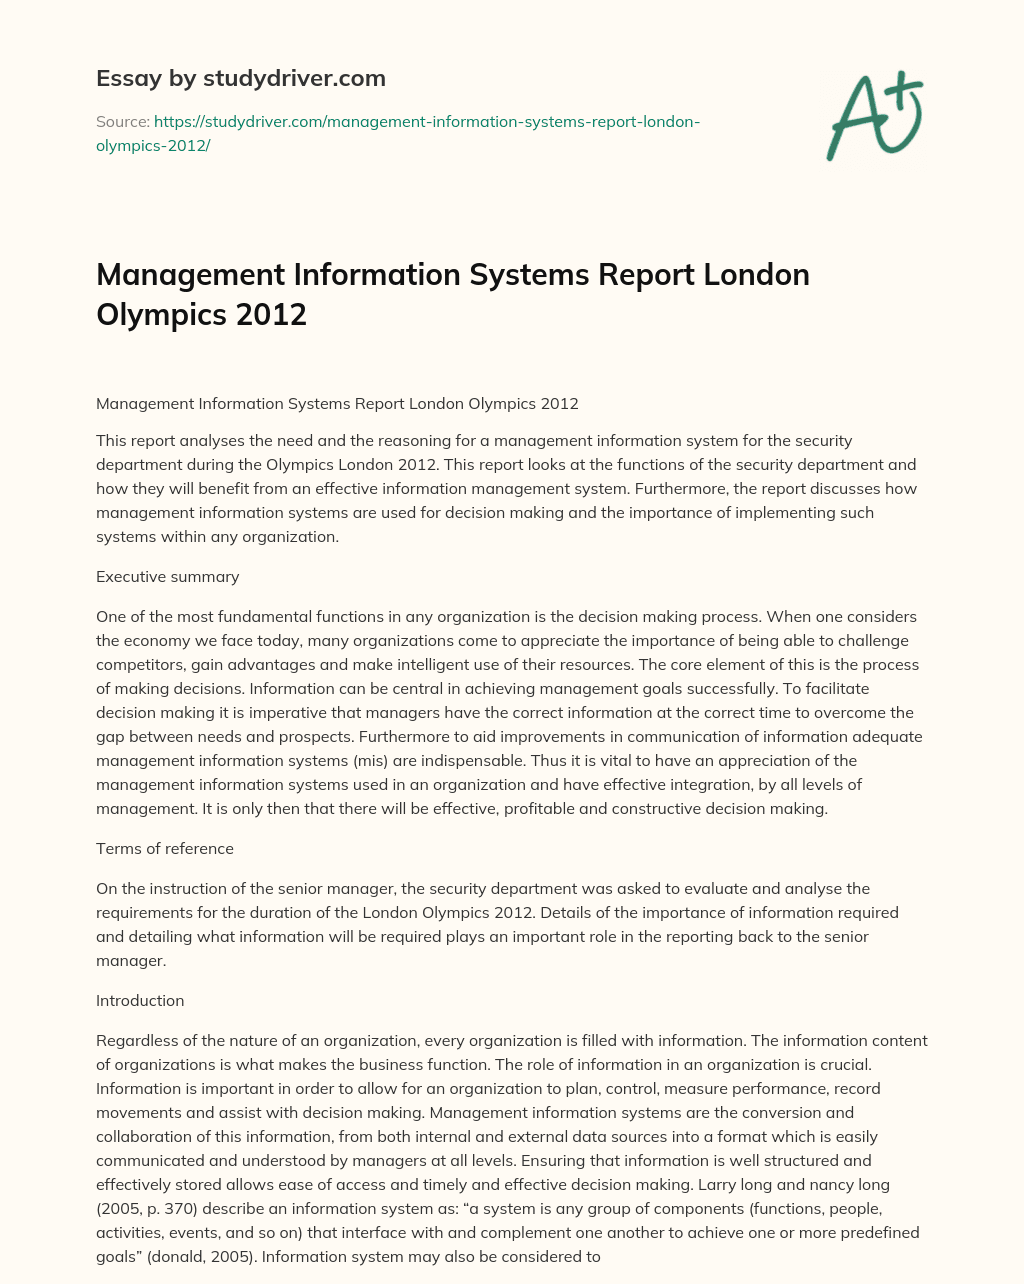 Management Information Systems Report London Olympics 2012 essay